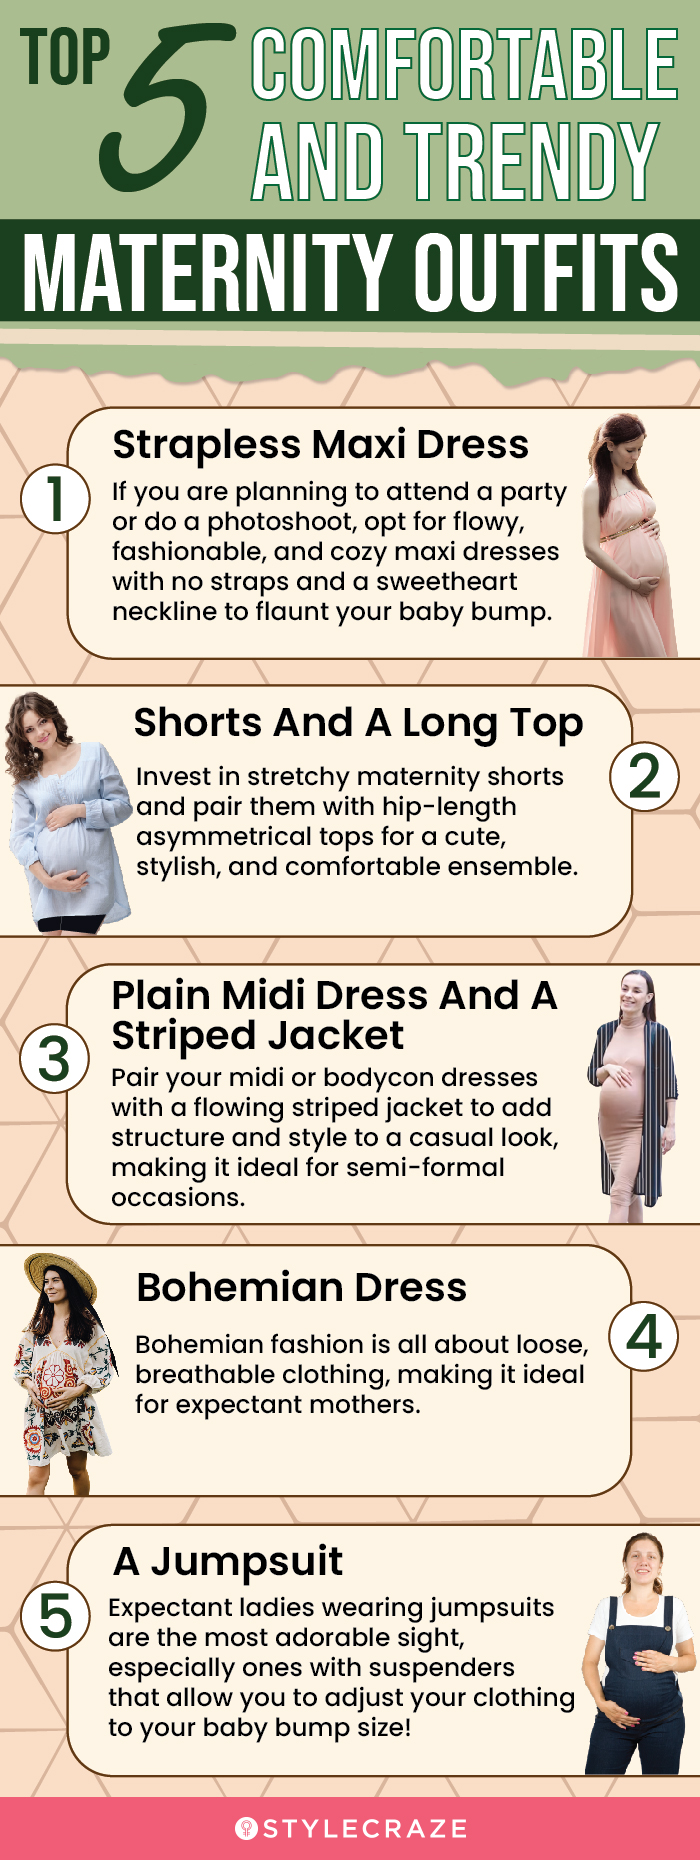 top 5 comfortable and trendy maternity outfits (infographic)